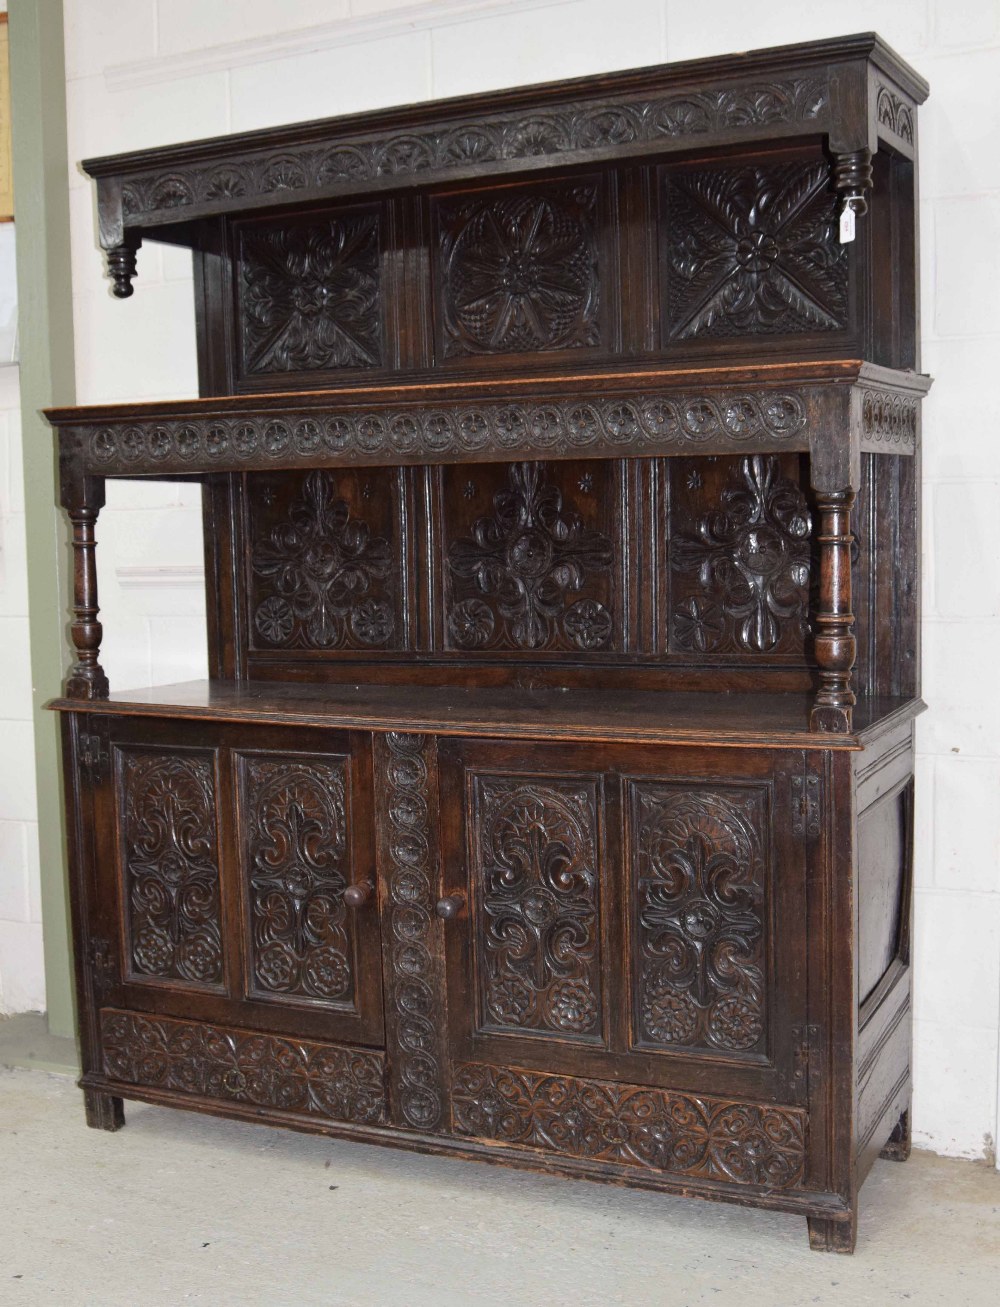 Antique oak tridarn, with a carved open frieze panel over two cupboard doors and two lower